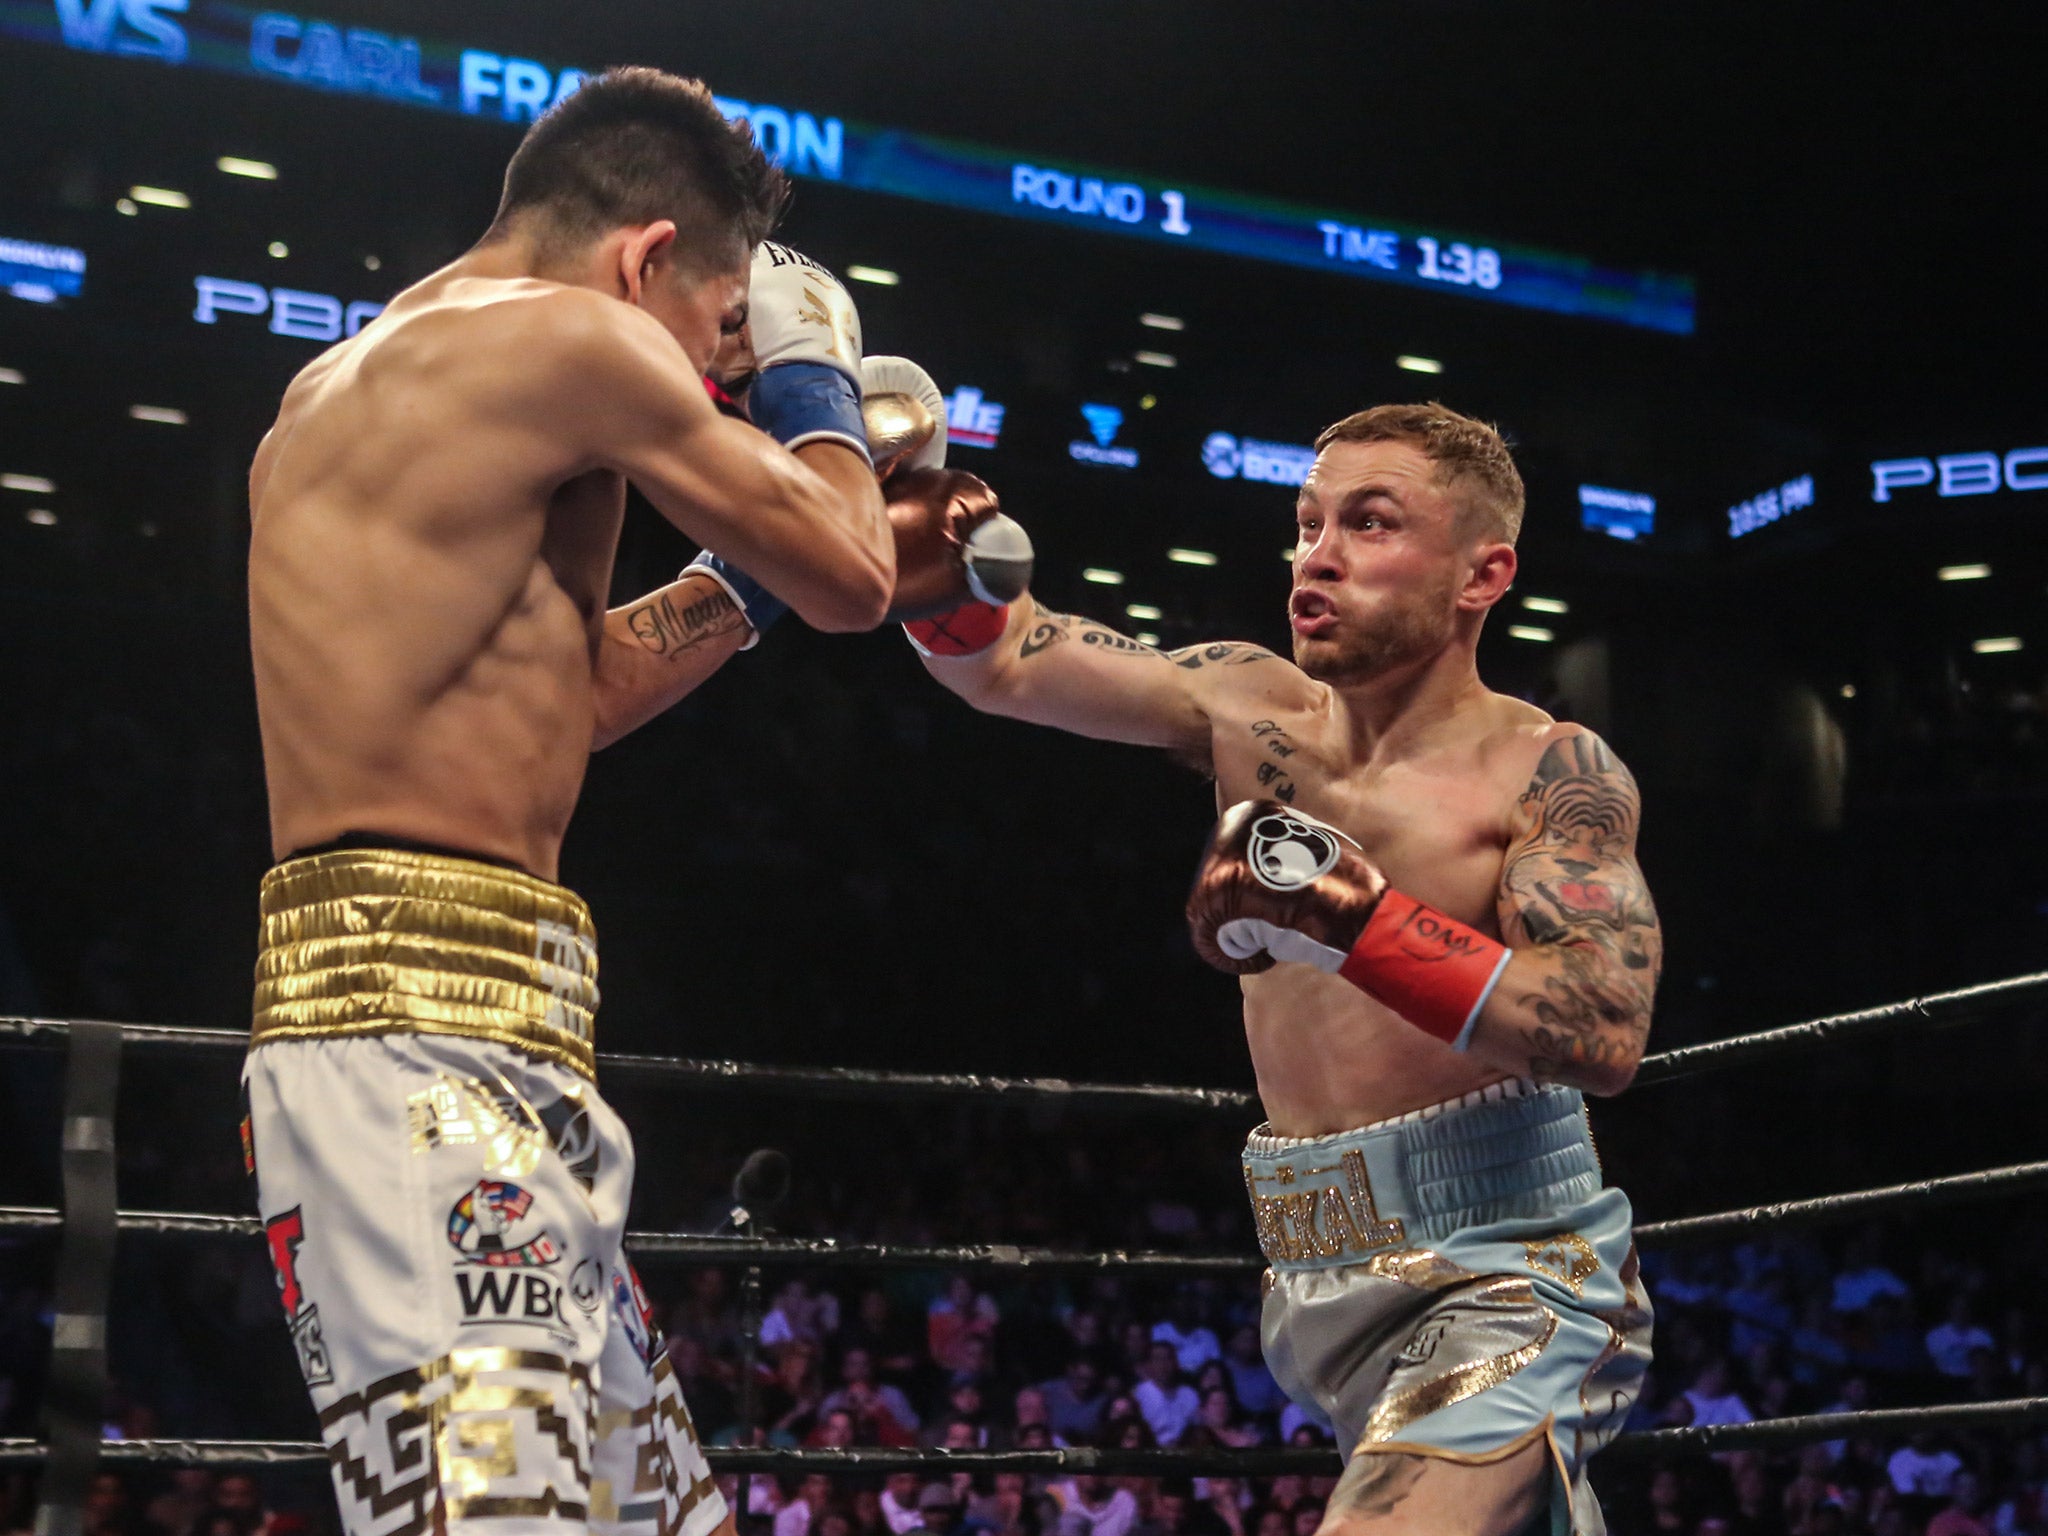 Frampton made a fast start to take the early rounds and build a lead